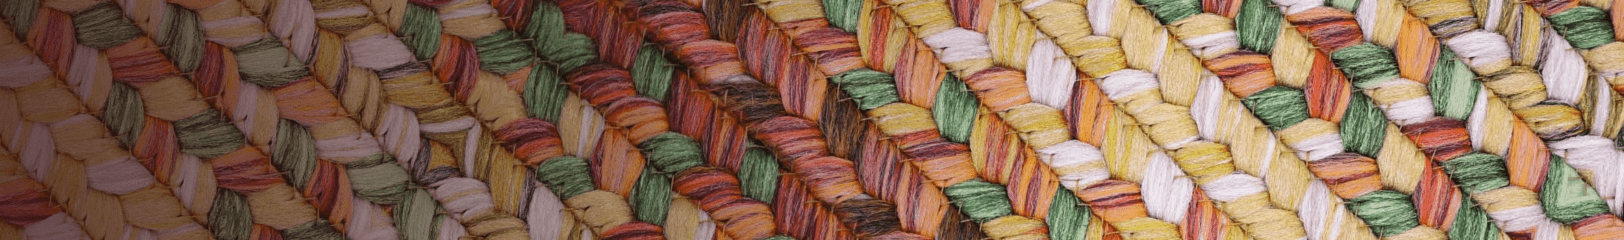 Other - Polypropylene - Braided Rugs